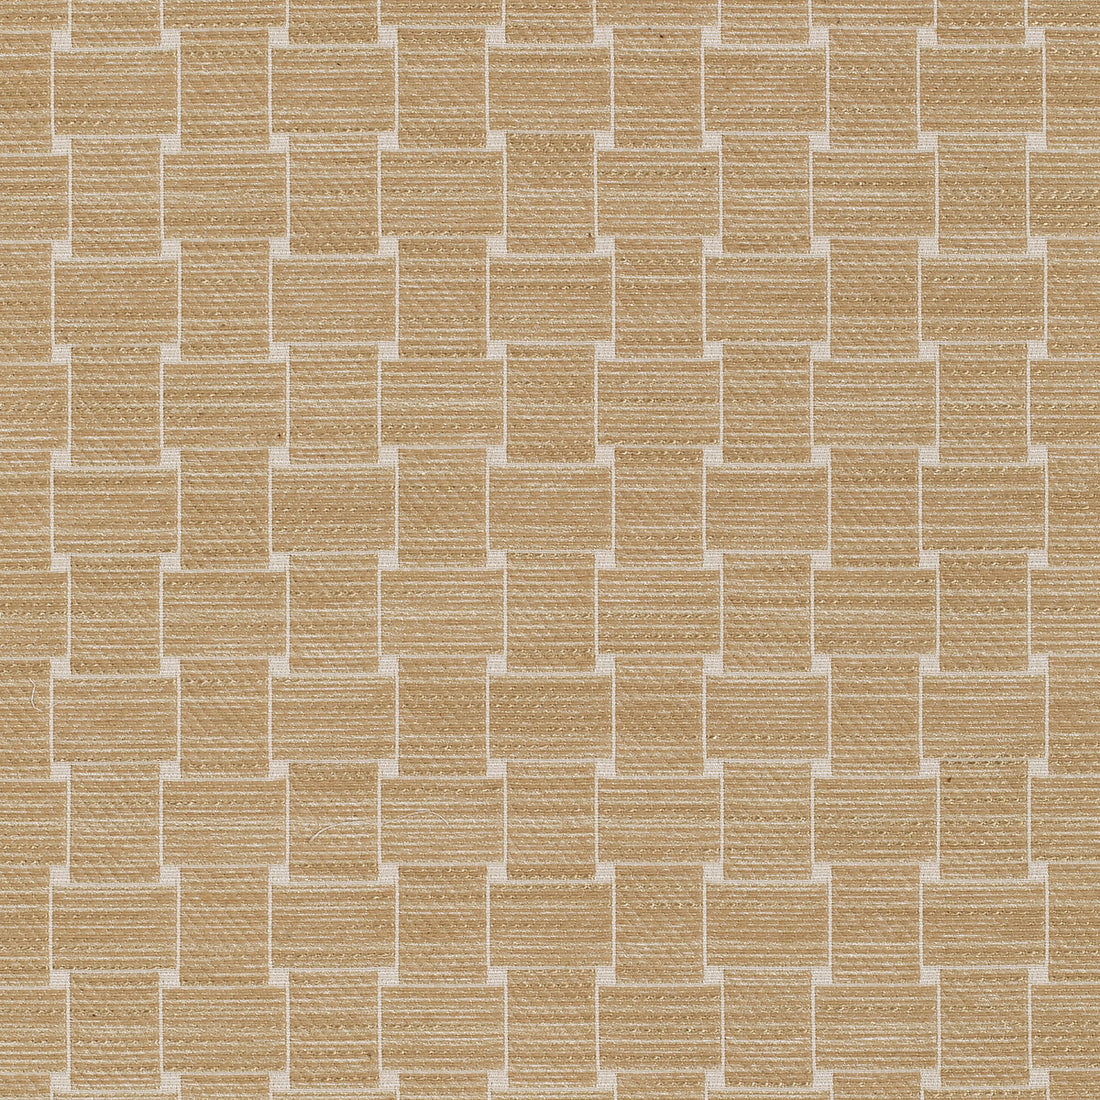 Beaumois Woven fabric in beige color - pattern 8020108.16.0 - by Brunschwig &amp; Fils in the Granville Weaves collection